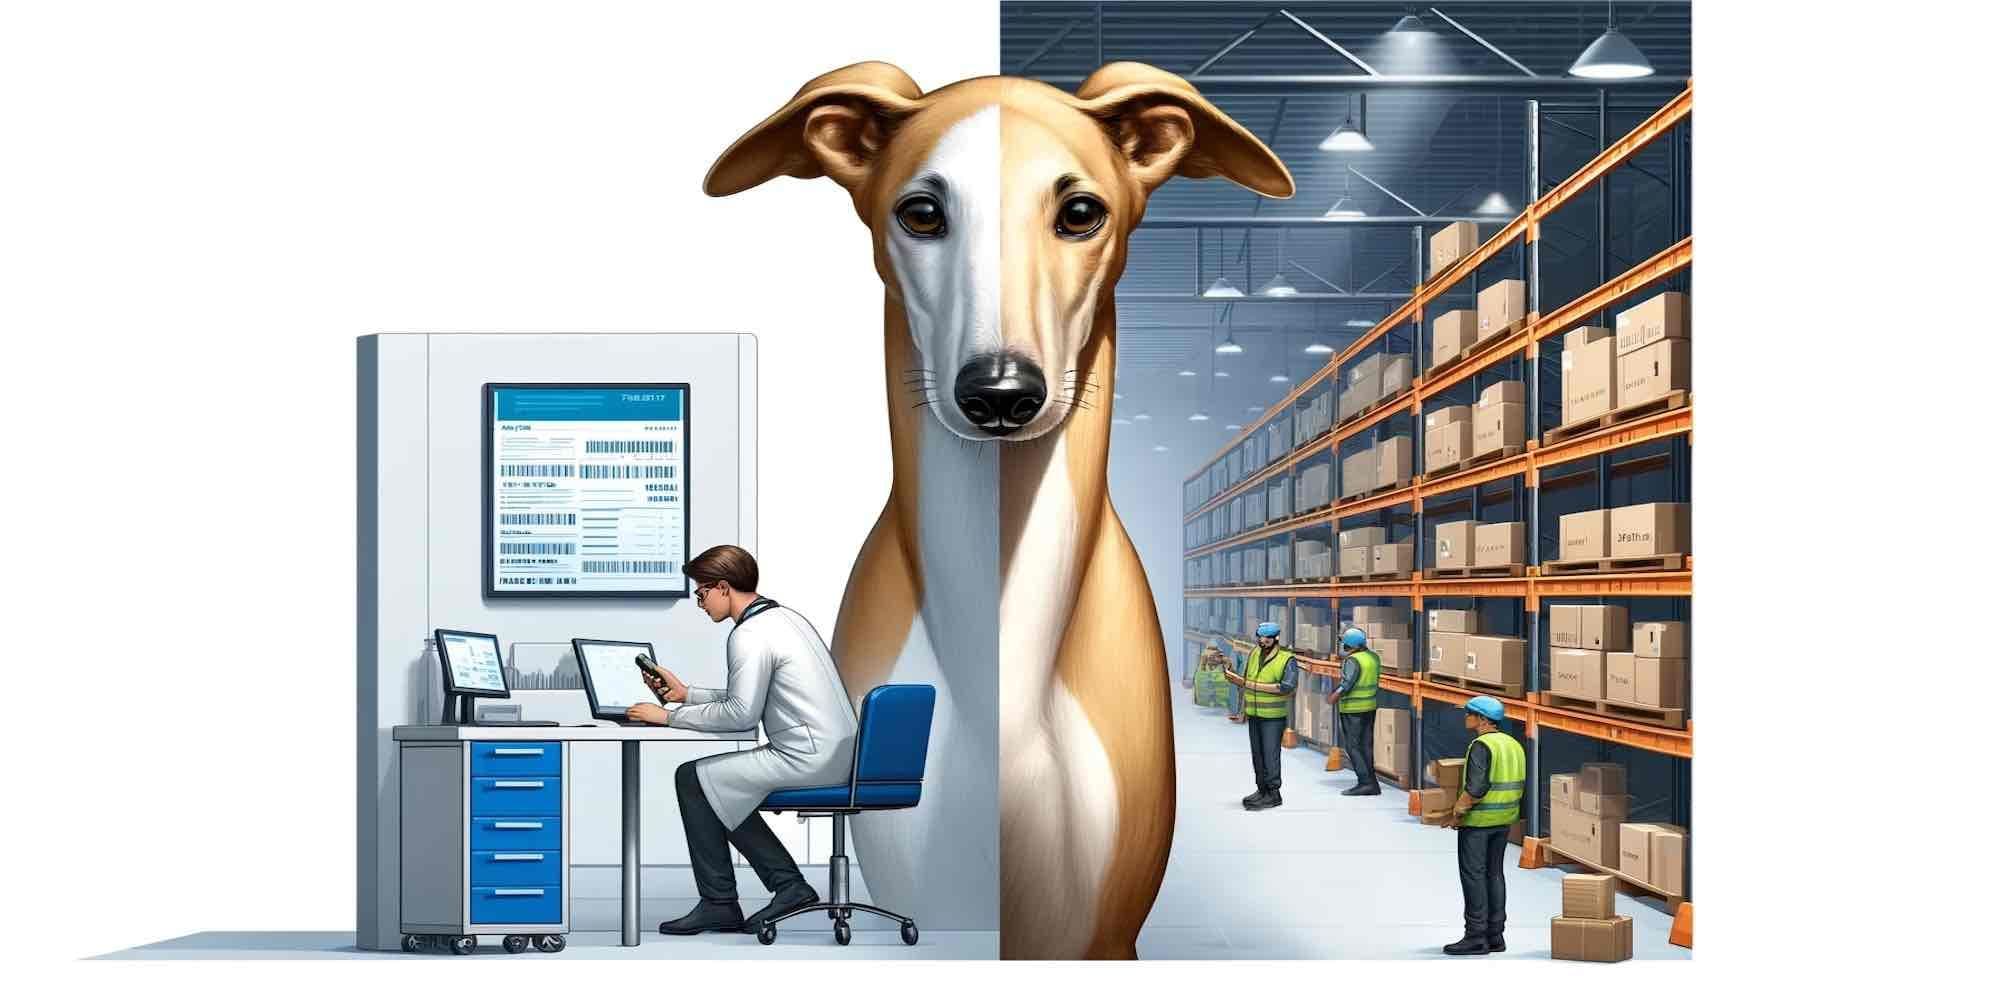 Cover Image for What's in a Name? How Sitehound, a Leading Asset & Inventory Management Software, Got Its Name from a Veterinarian